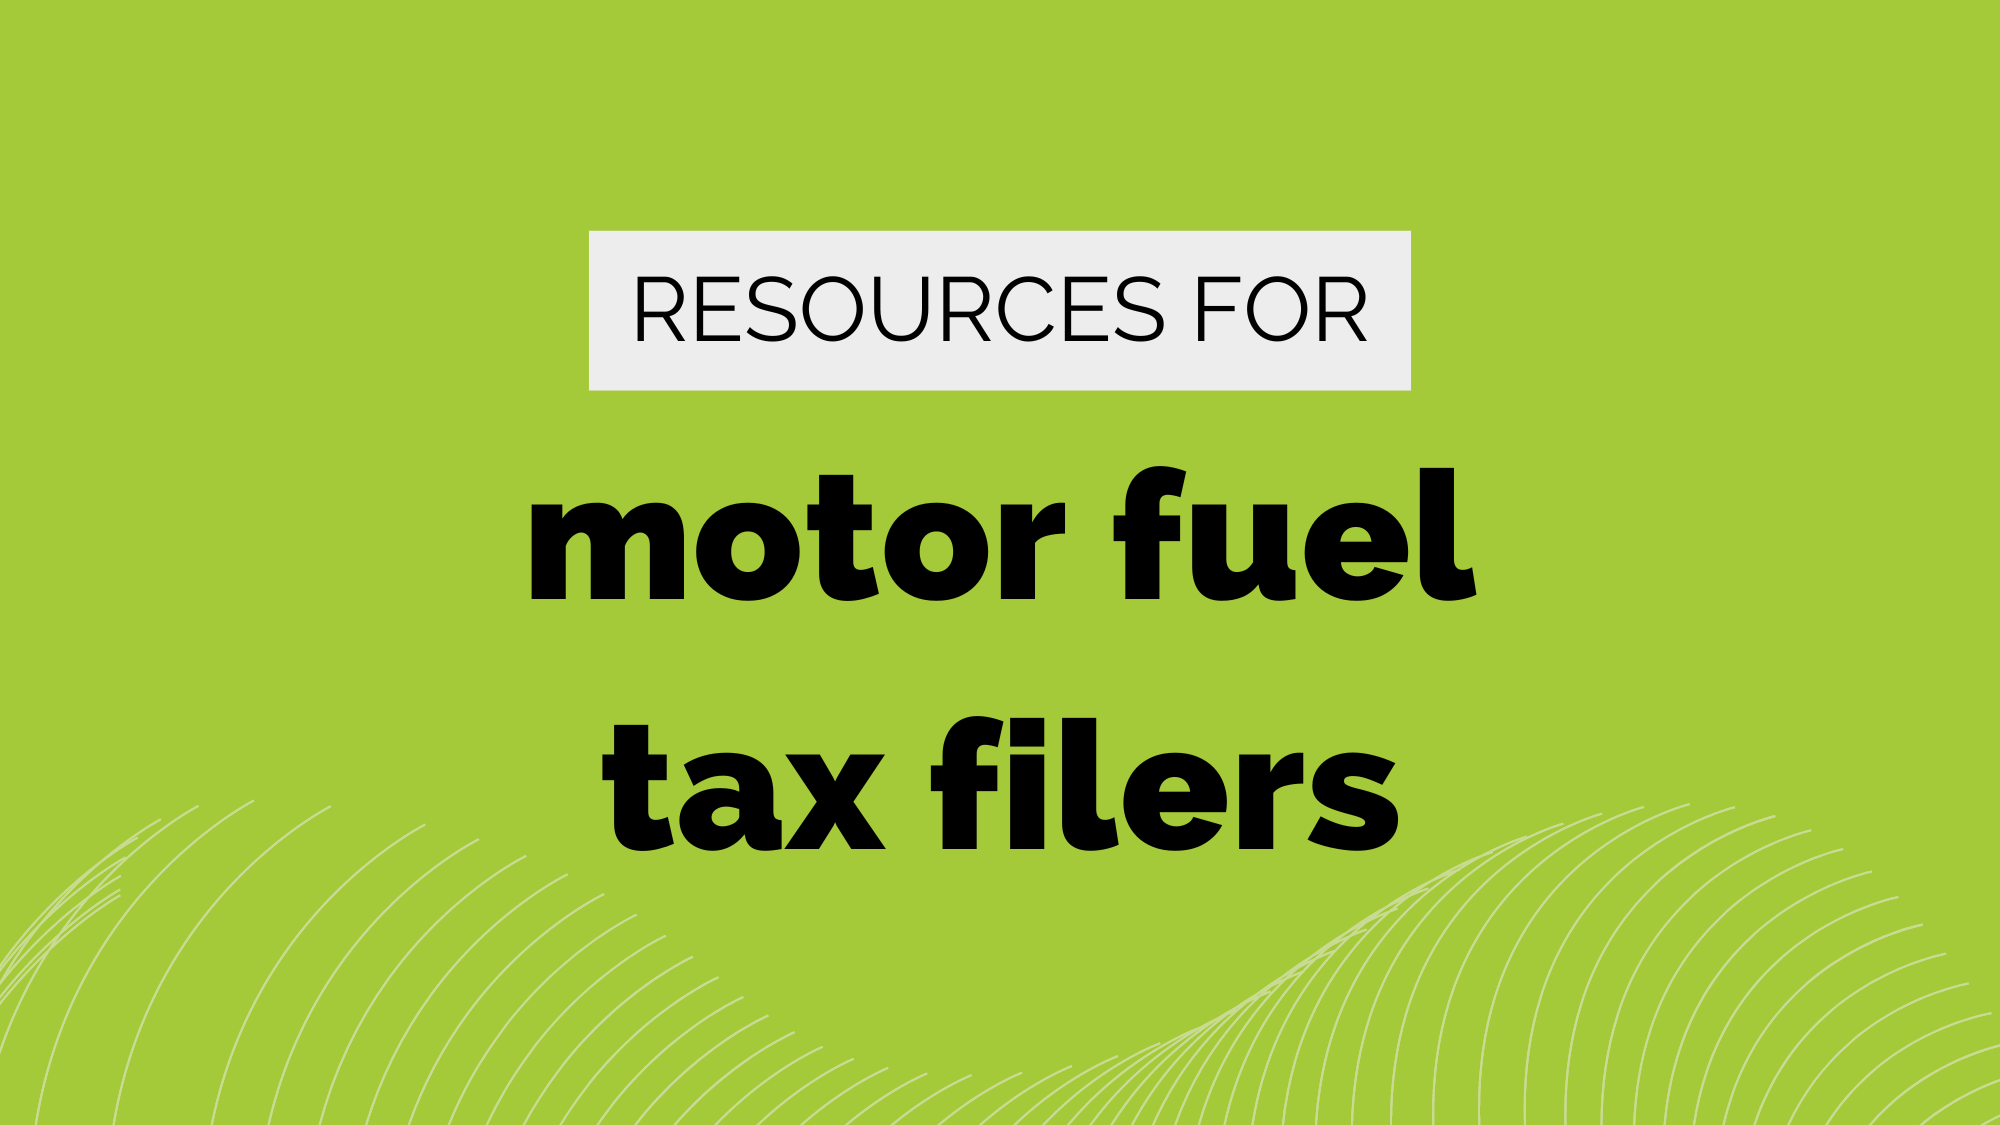 Resources for motor fuel tax filers (2000 × 1125 px)